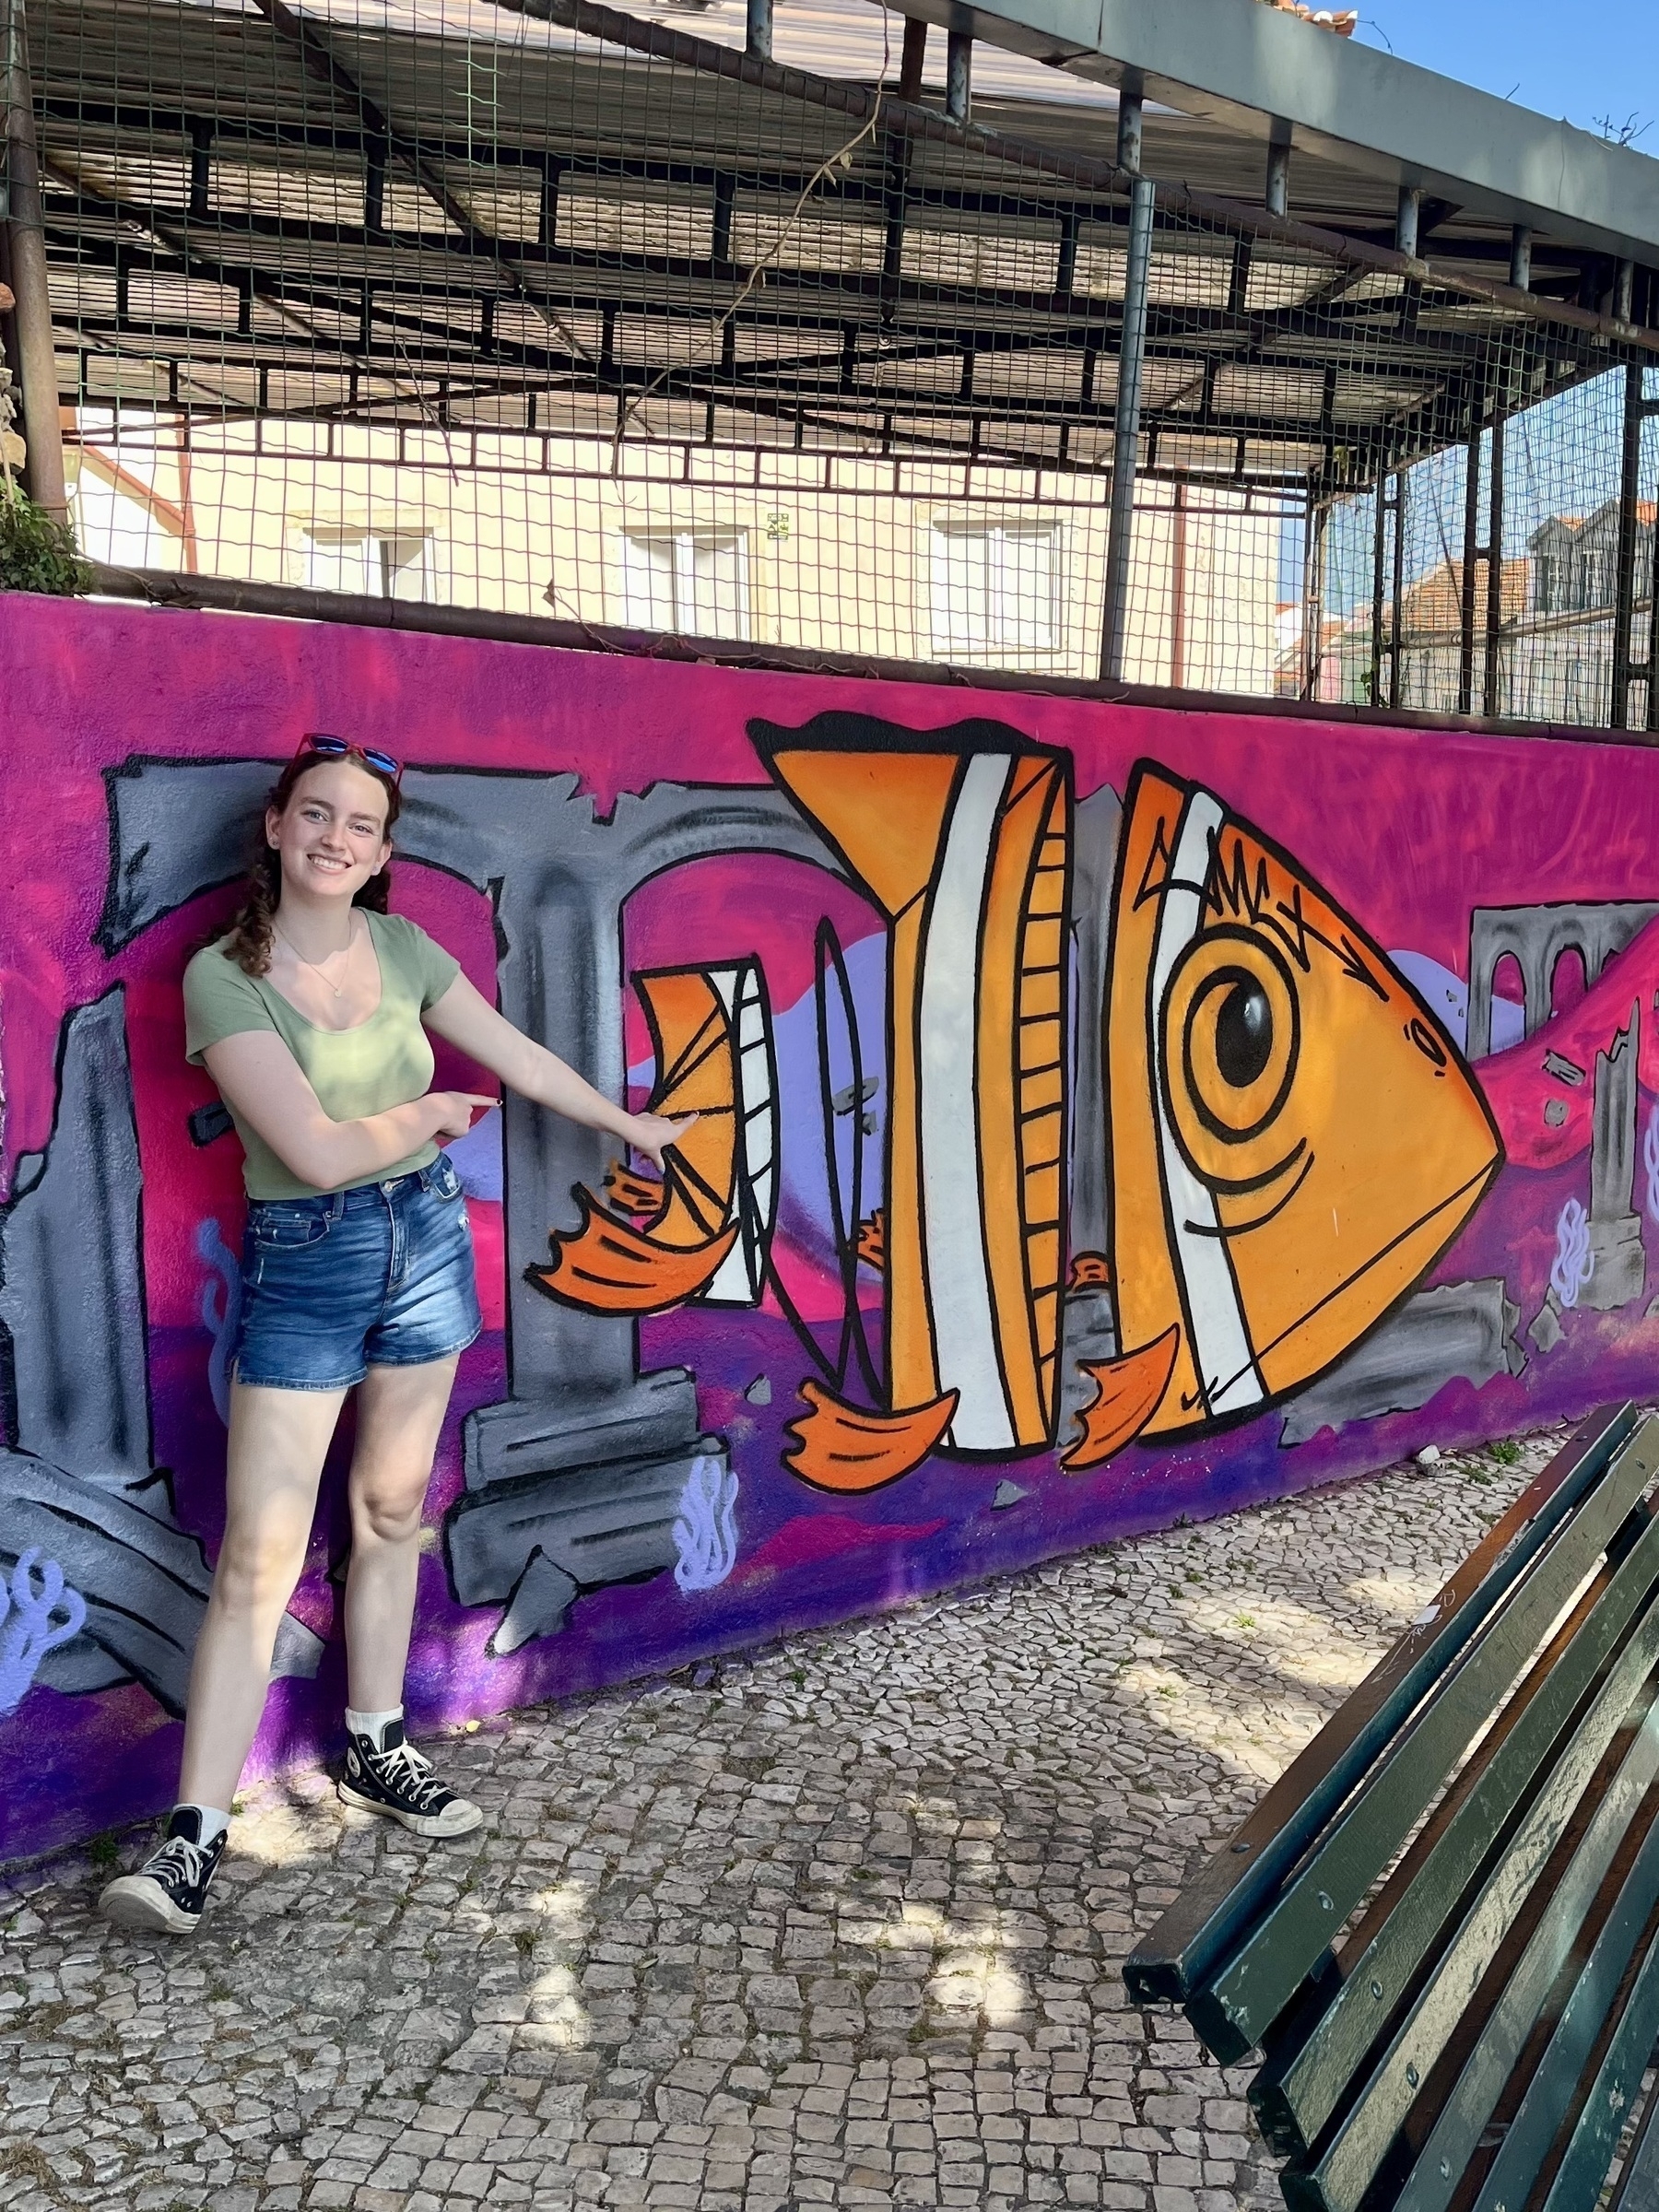 A smiling person leans against a colorful mural of a fish; urban setting with cobblestones and benches.